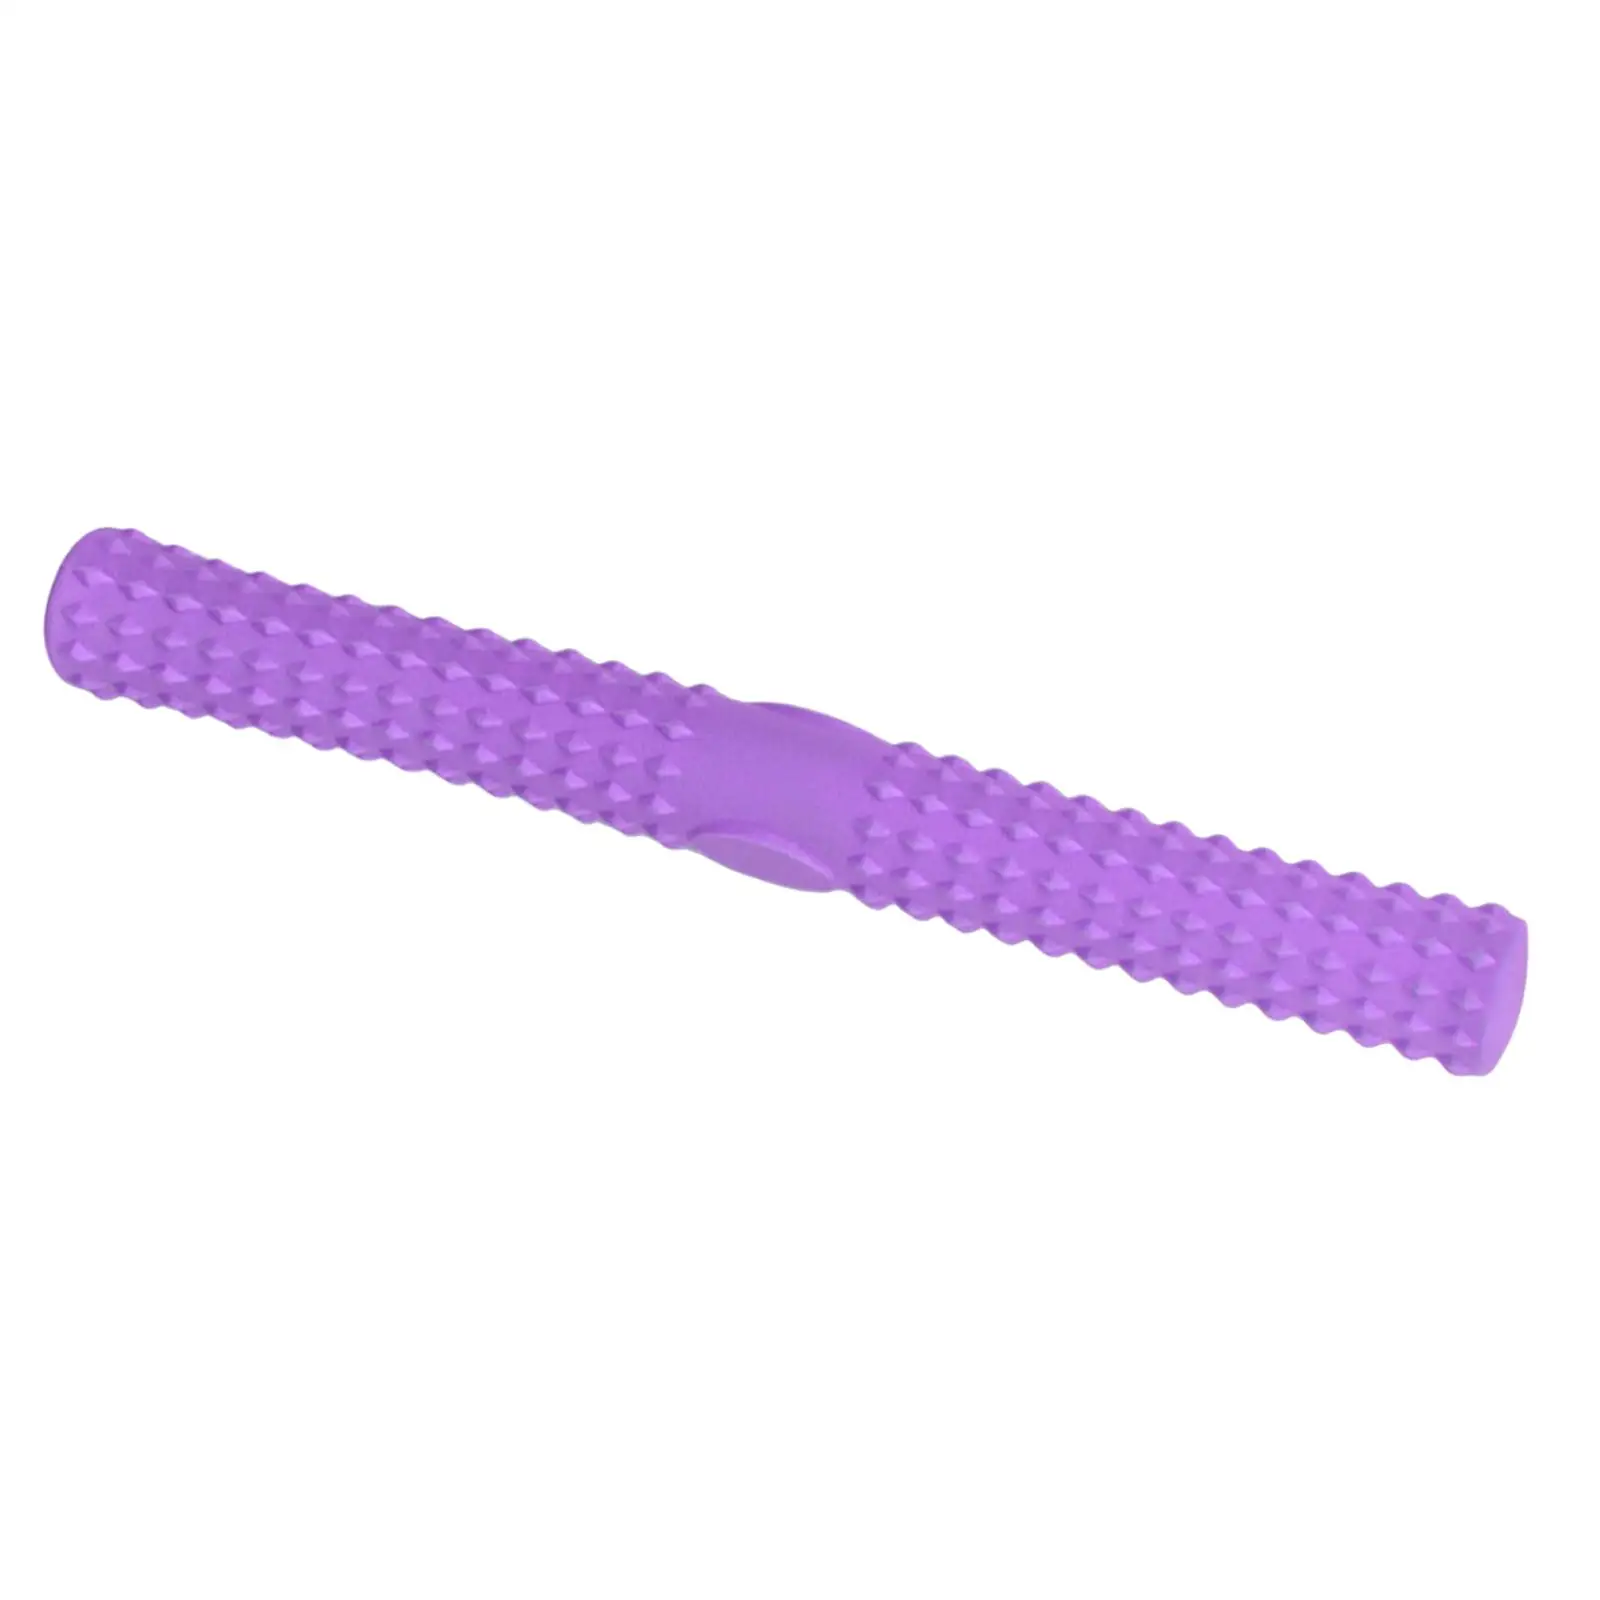 Twist Exerciser Bars Exercise Equipment Muscle Roller Tool Portable Workout Massage Roller Stick for Legs Travel Back Calf Body